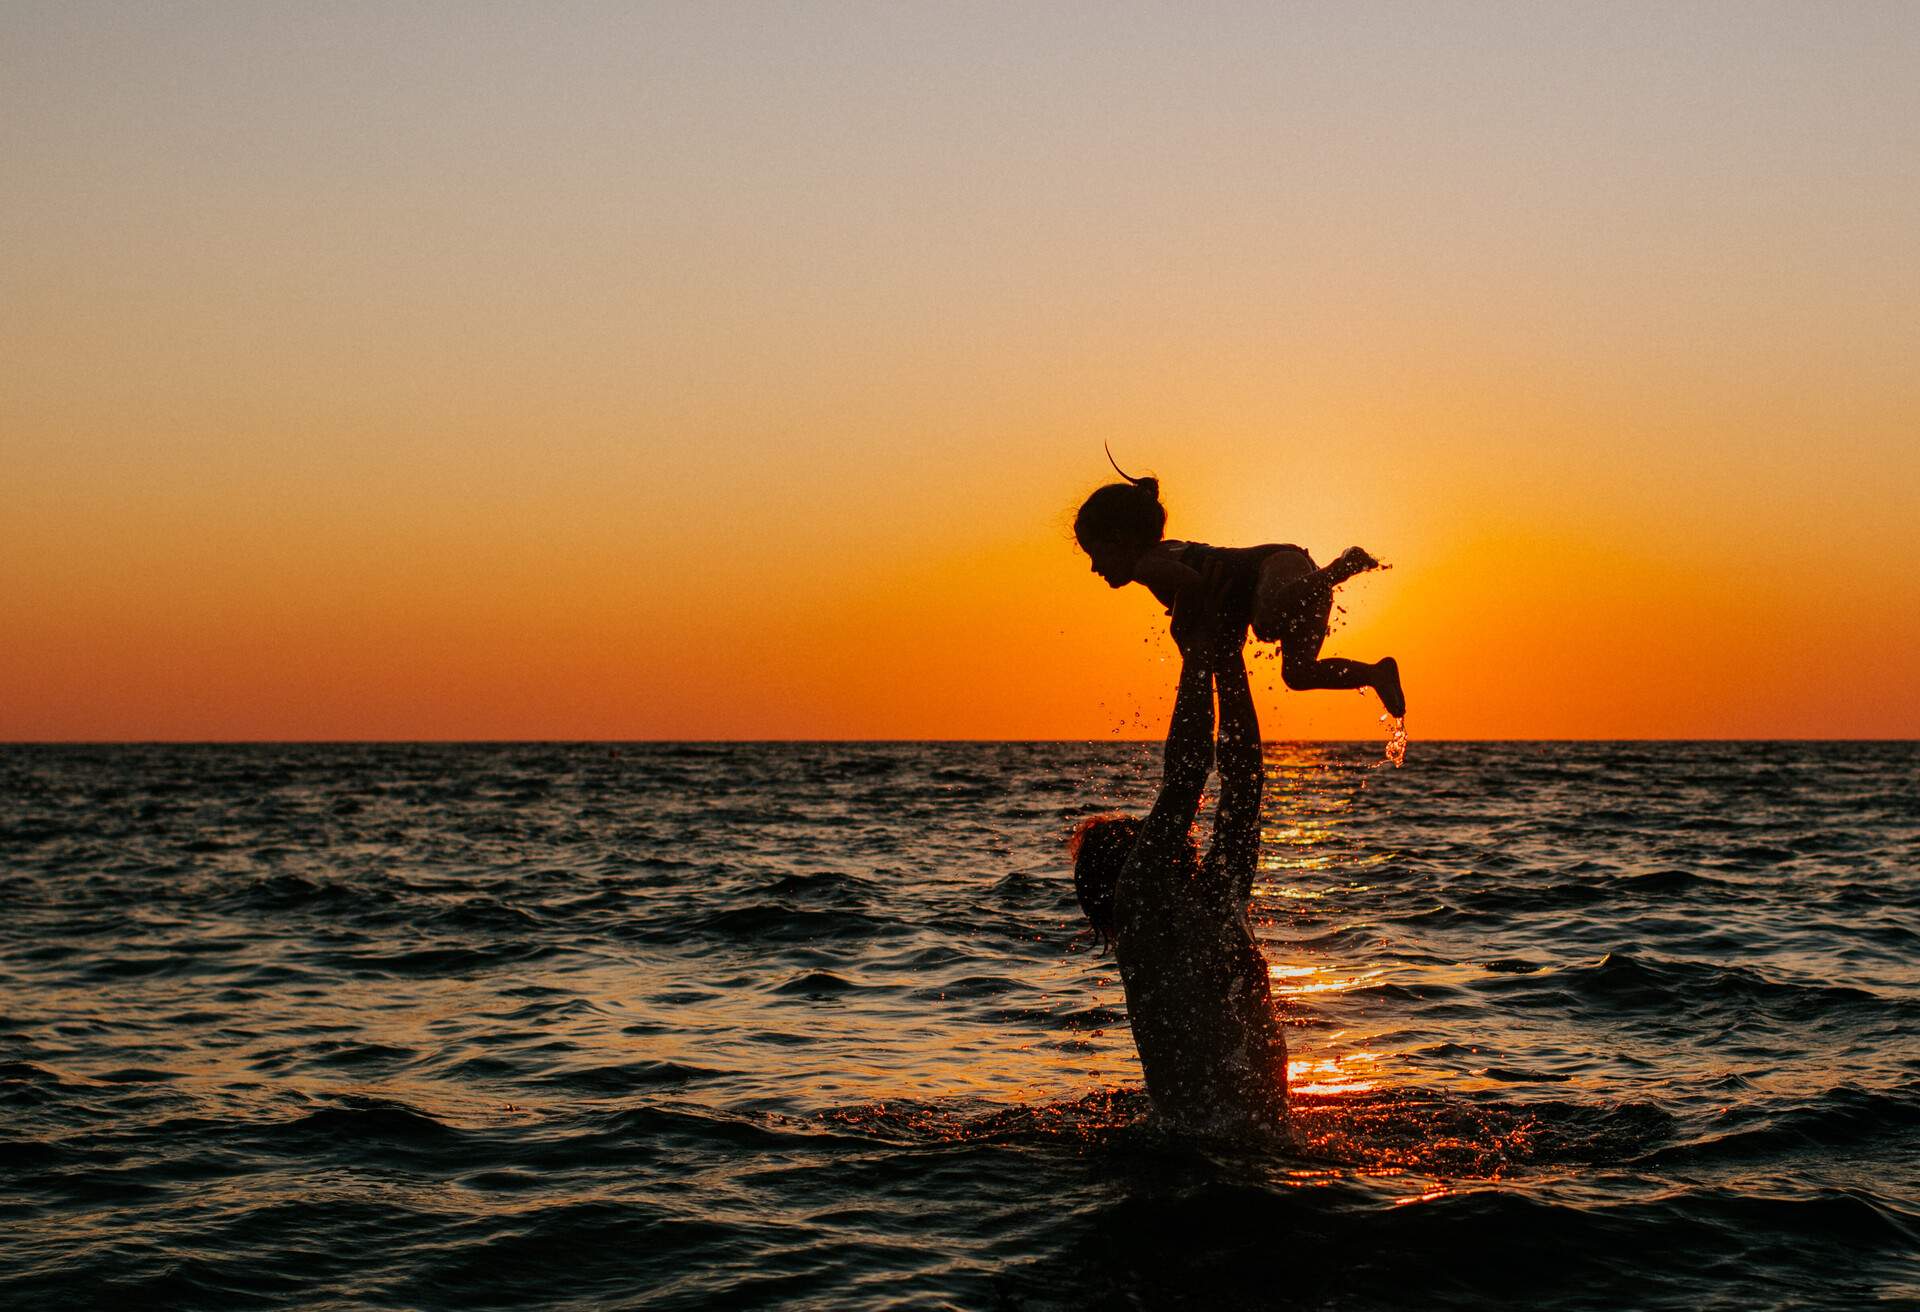 Father and child in the sea at sunset. Father throwing child into the air.